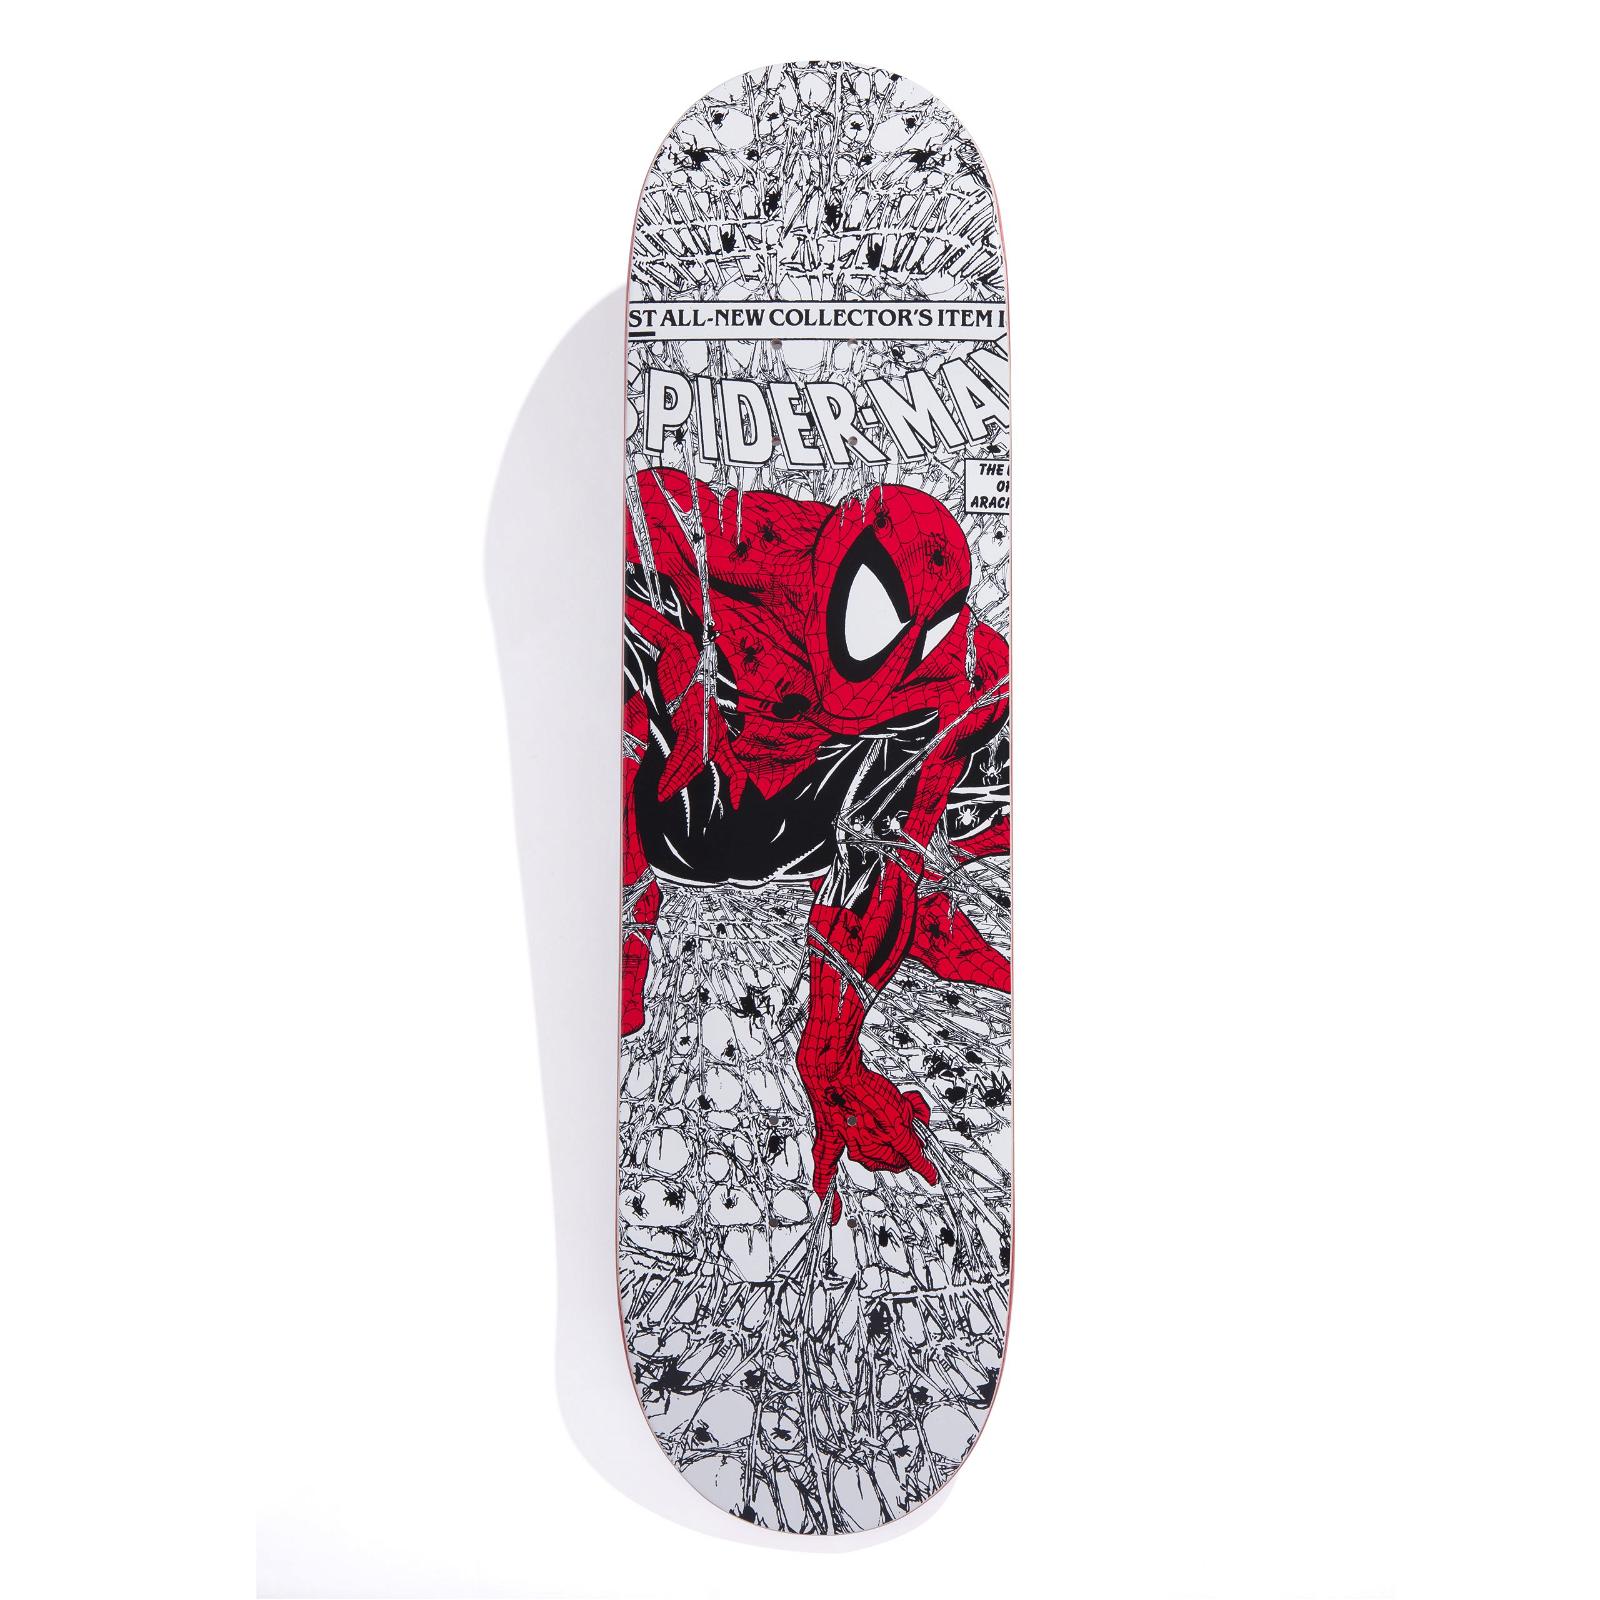 Marvel x HUF collection